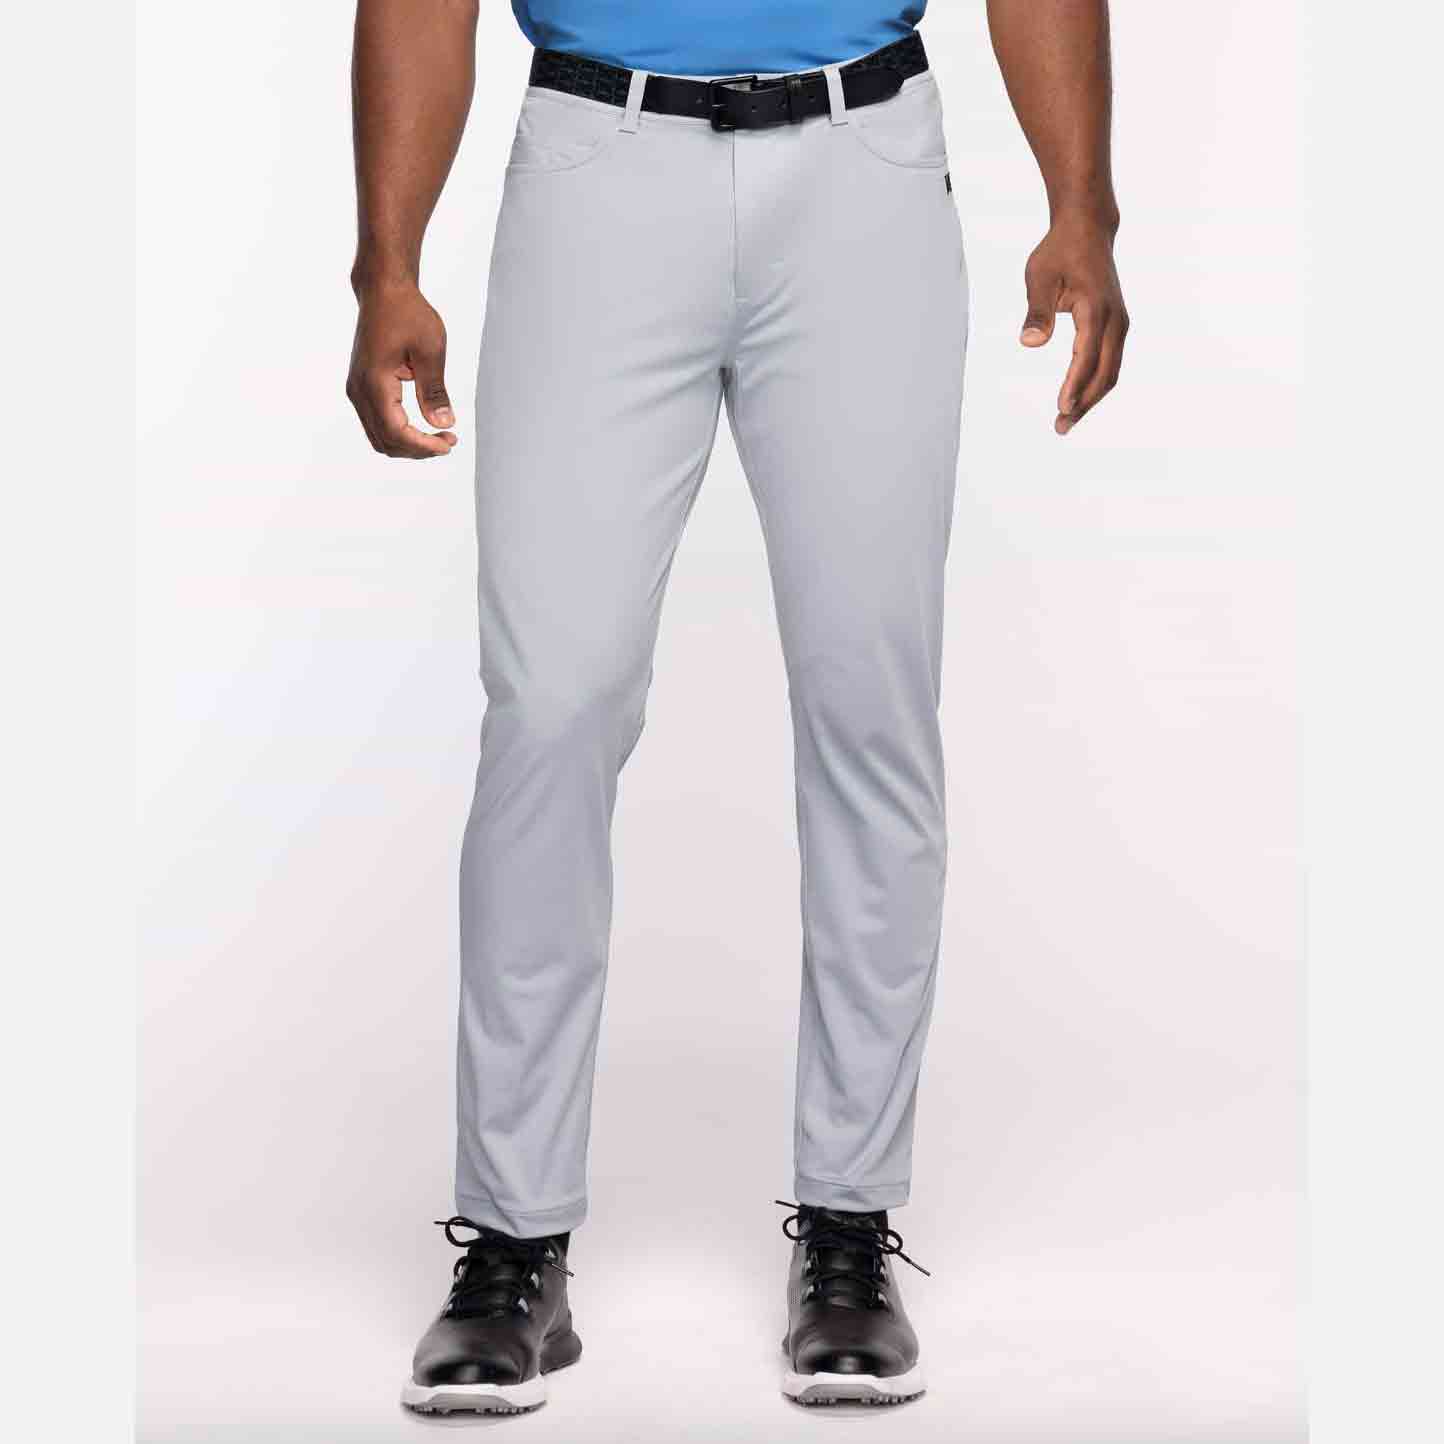 The Best Golf Pants for Long Days on the Links